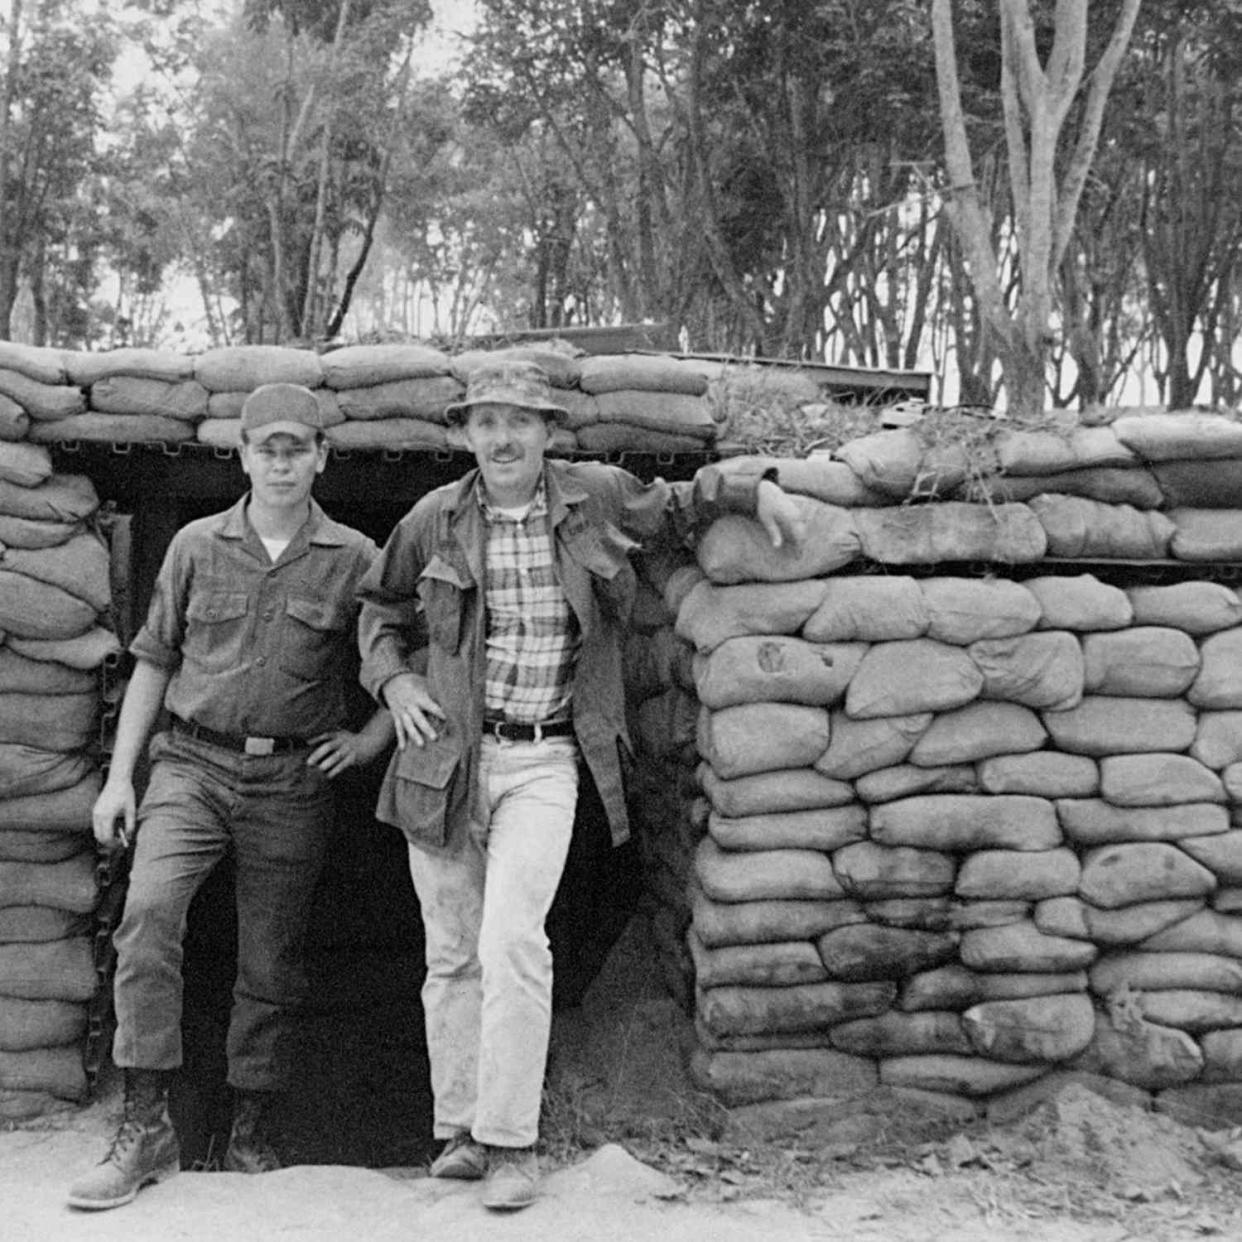 John ‘Chick’ Donohue with his friend Sgt. Bobby Pappas in Vietnam